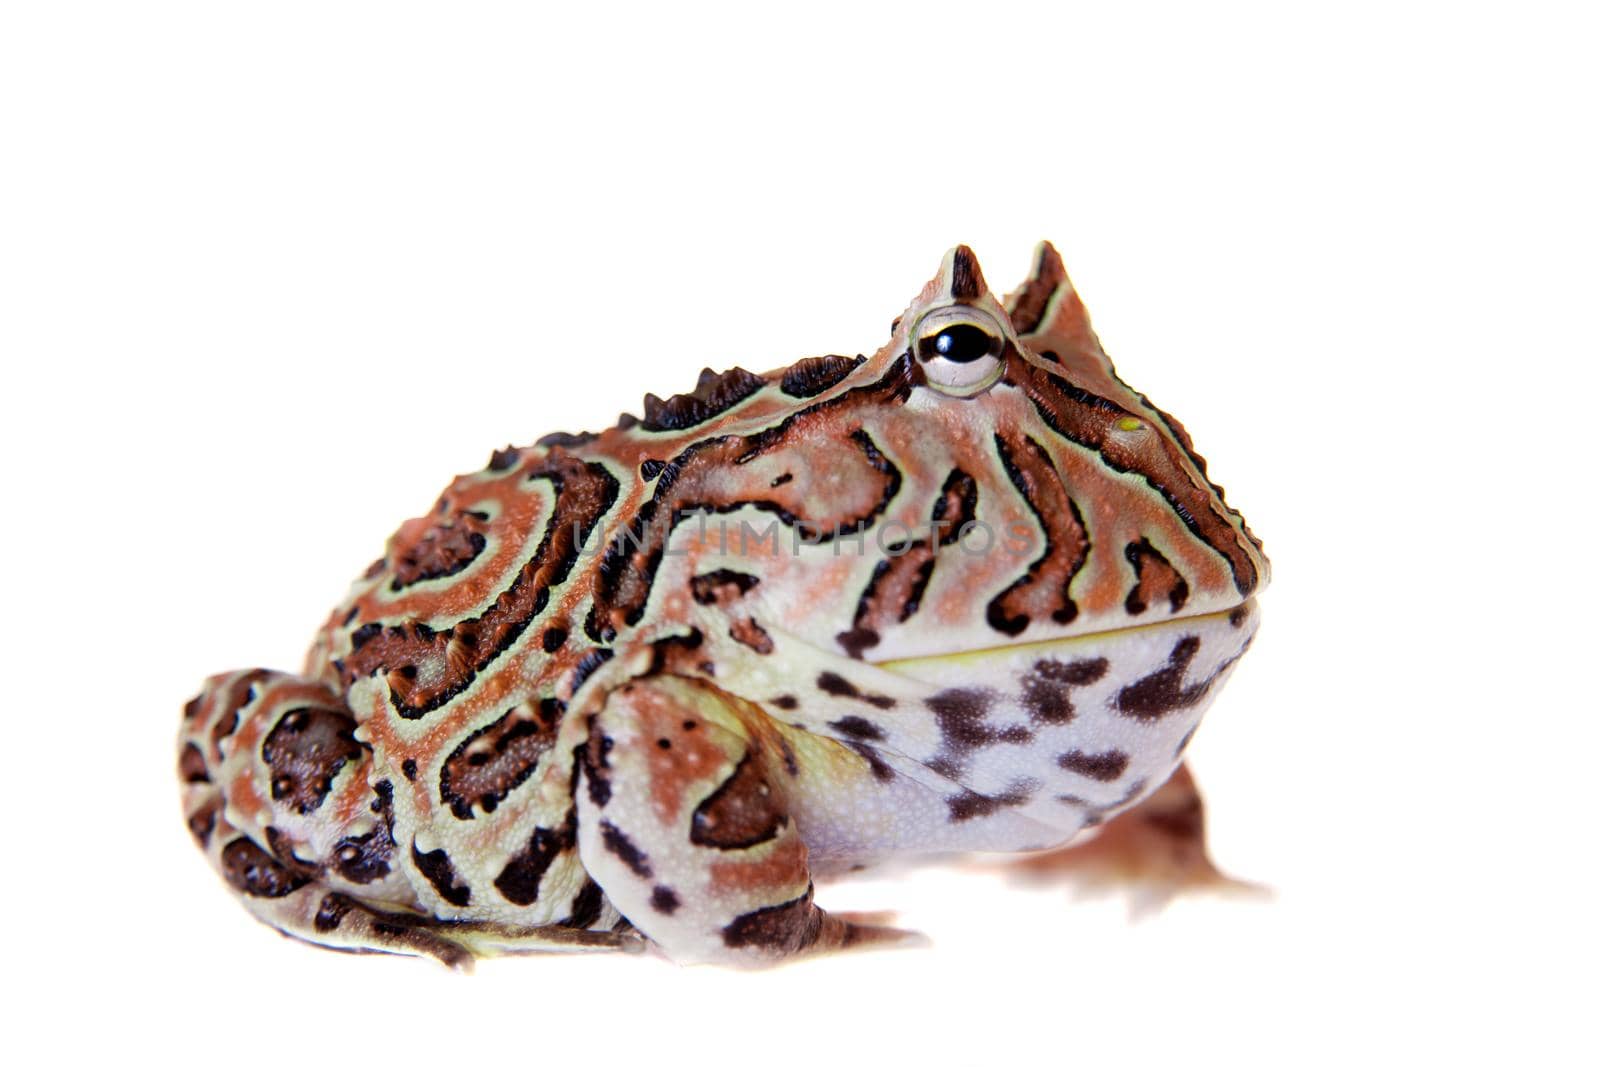 The Fantasy horned frog isolated on white background